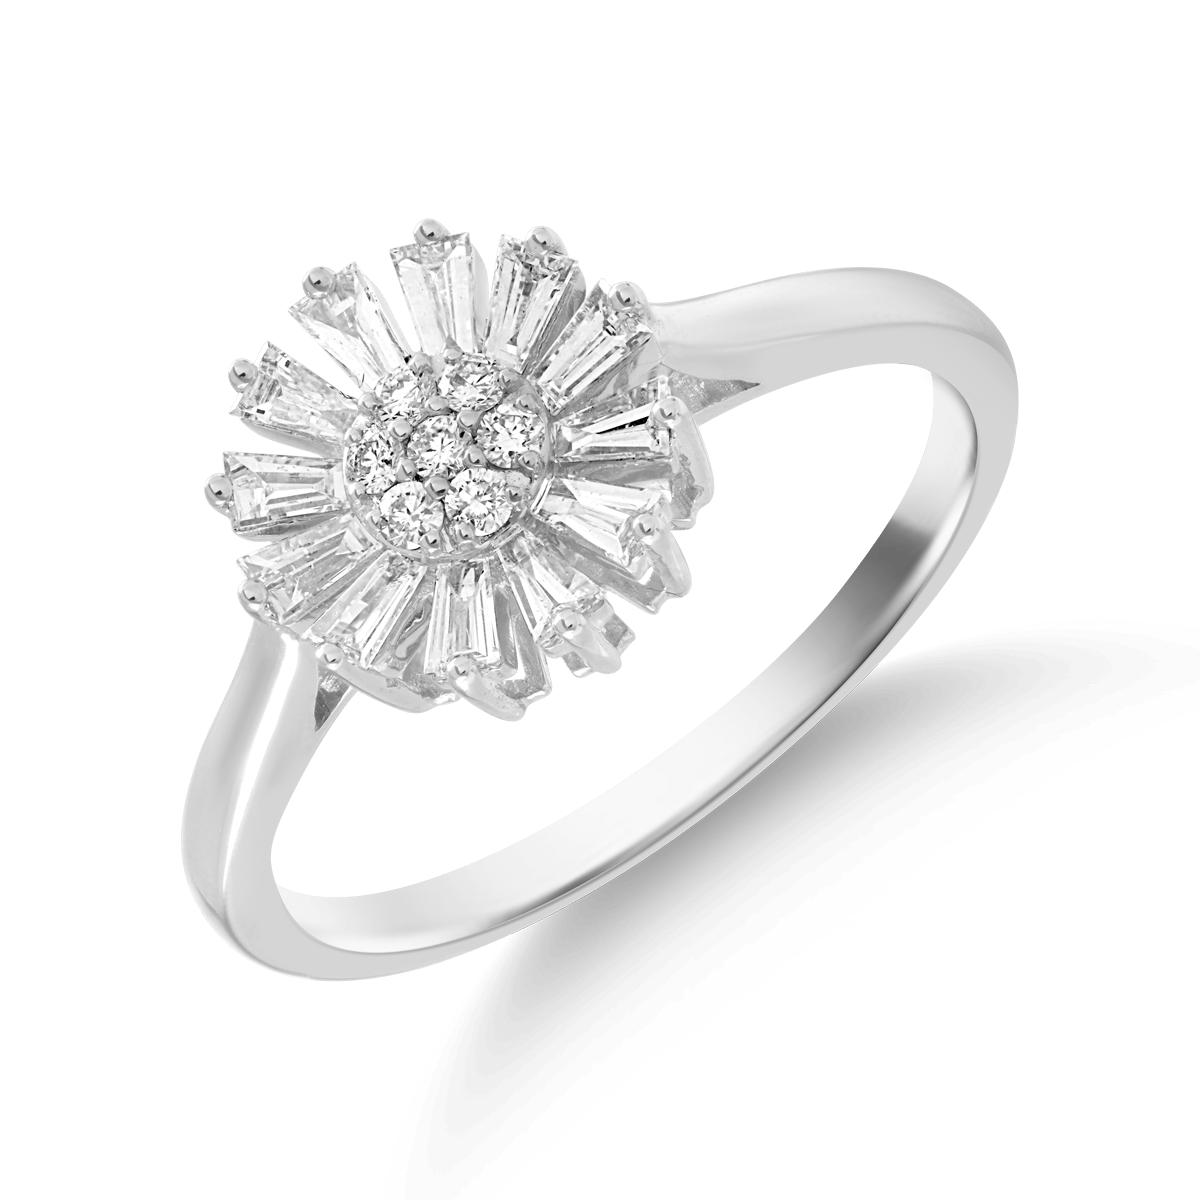 14K white gold flower ring with 0.37ct diamonds